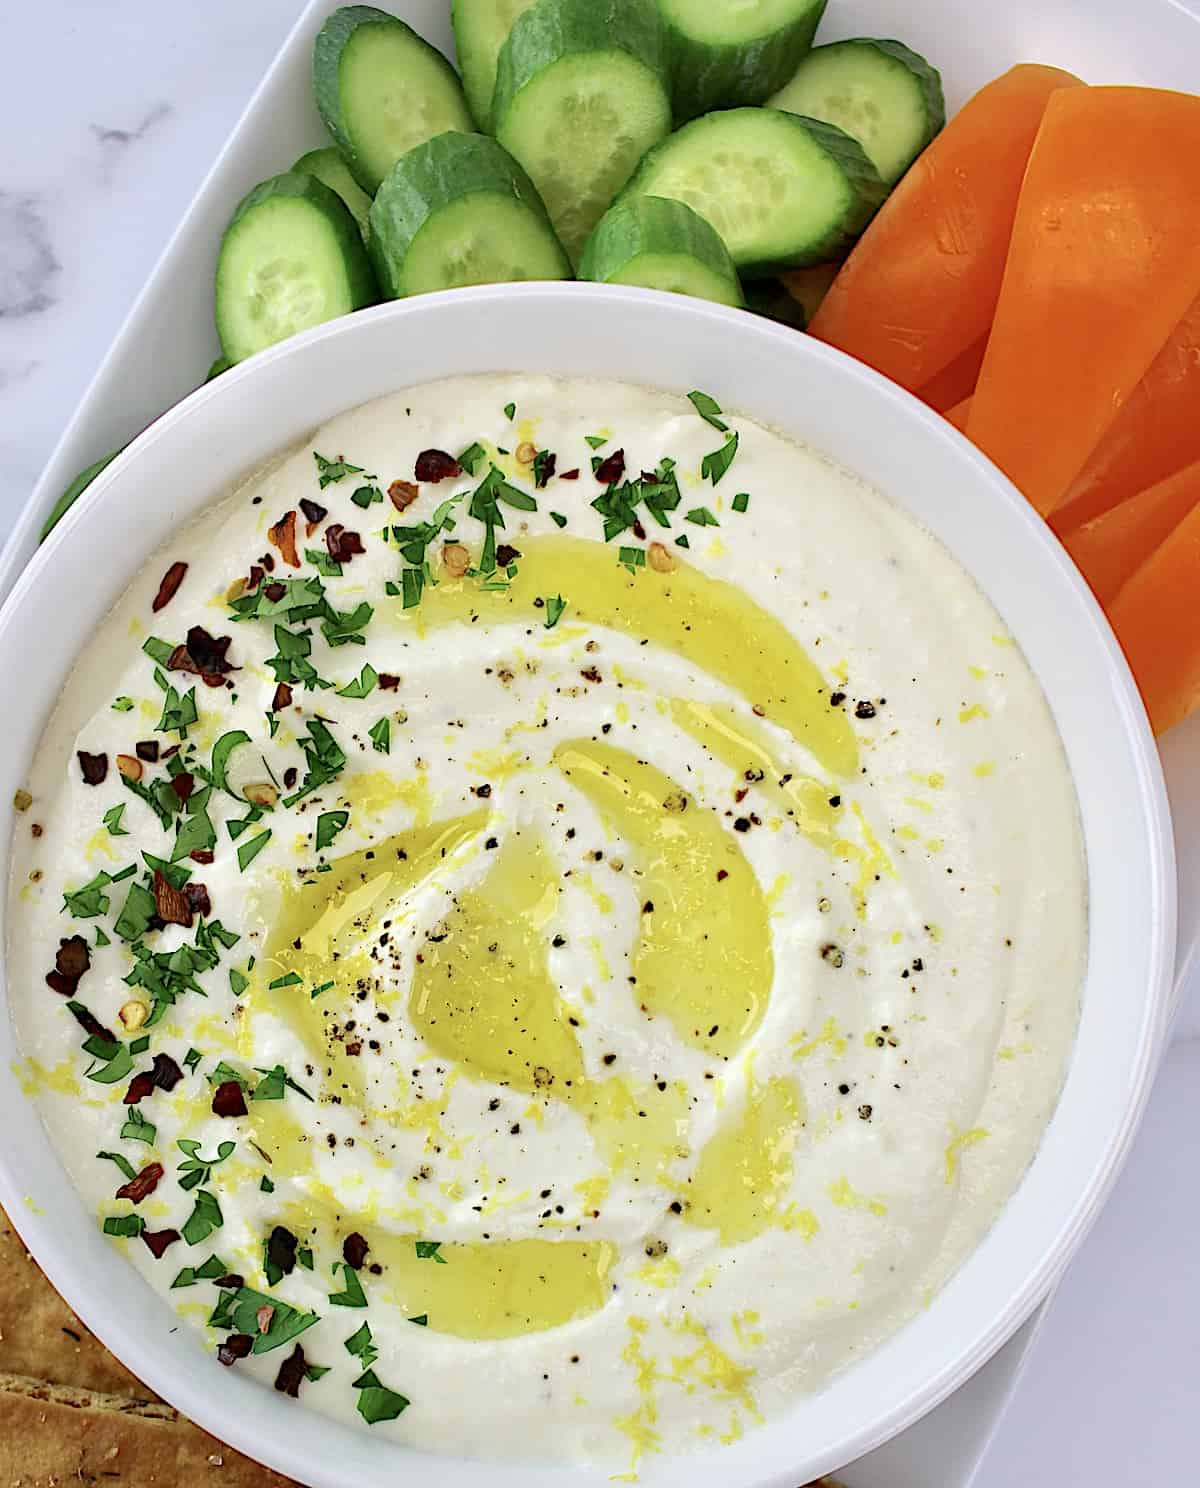 Whipped Feta Dip in white bowl with cucumber. slices and orange pepper strips on side